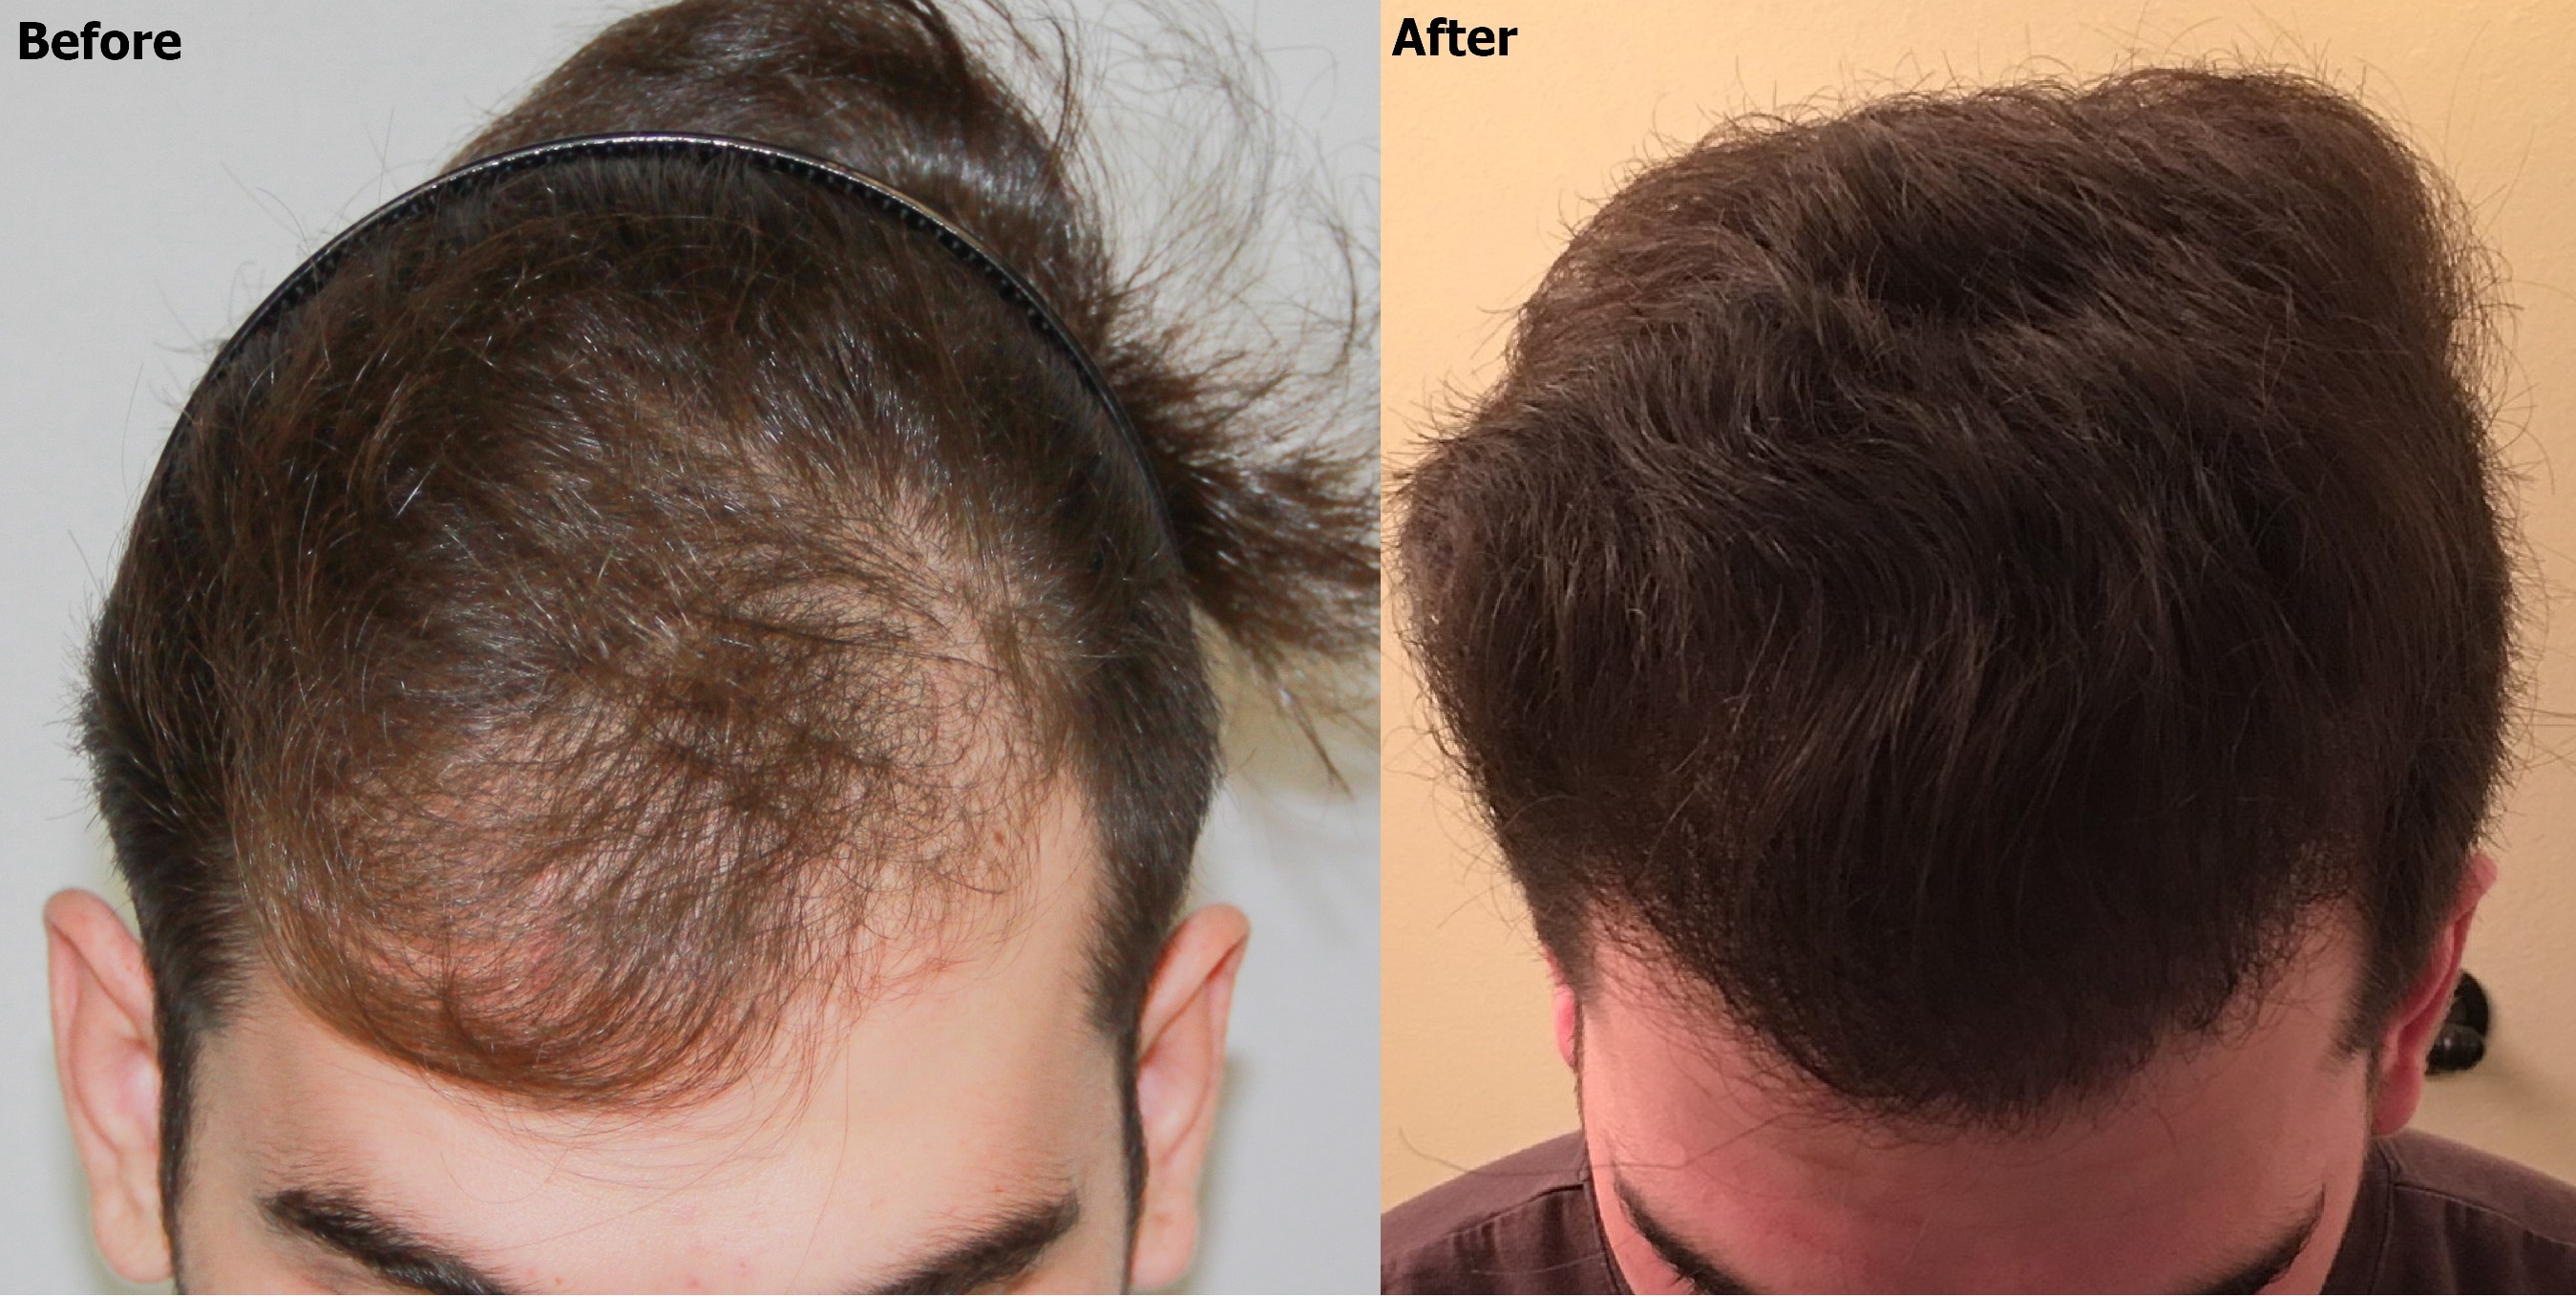 FUE and PRP result - 3,517 grafts - AlviArmani - Hair Transplant Los Angeles